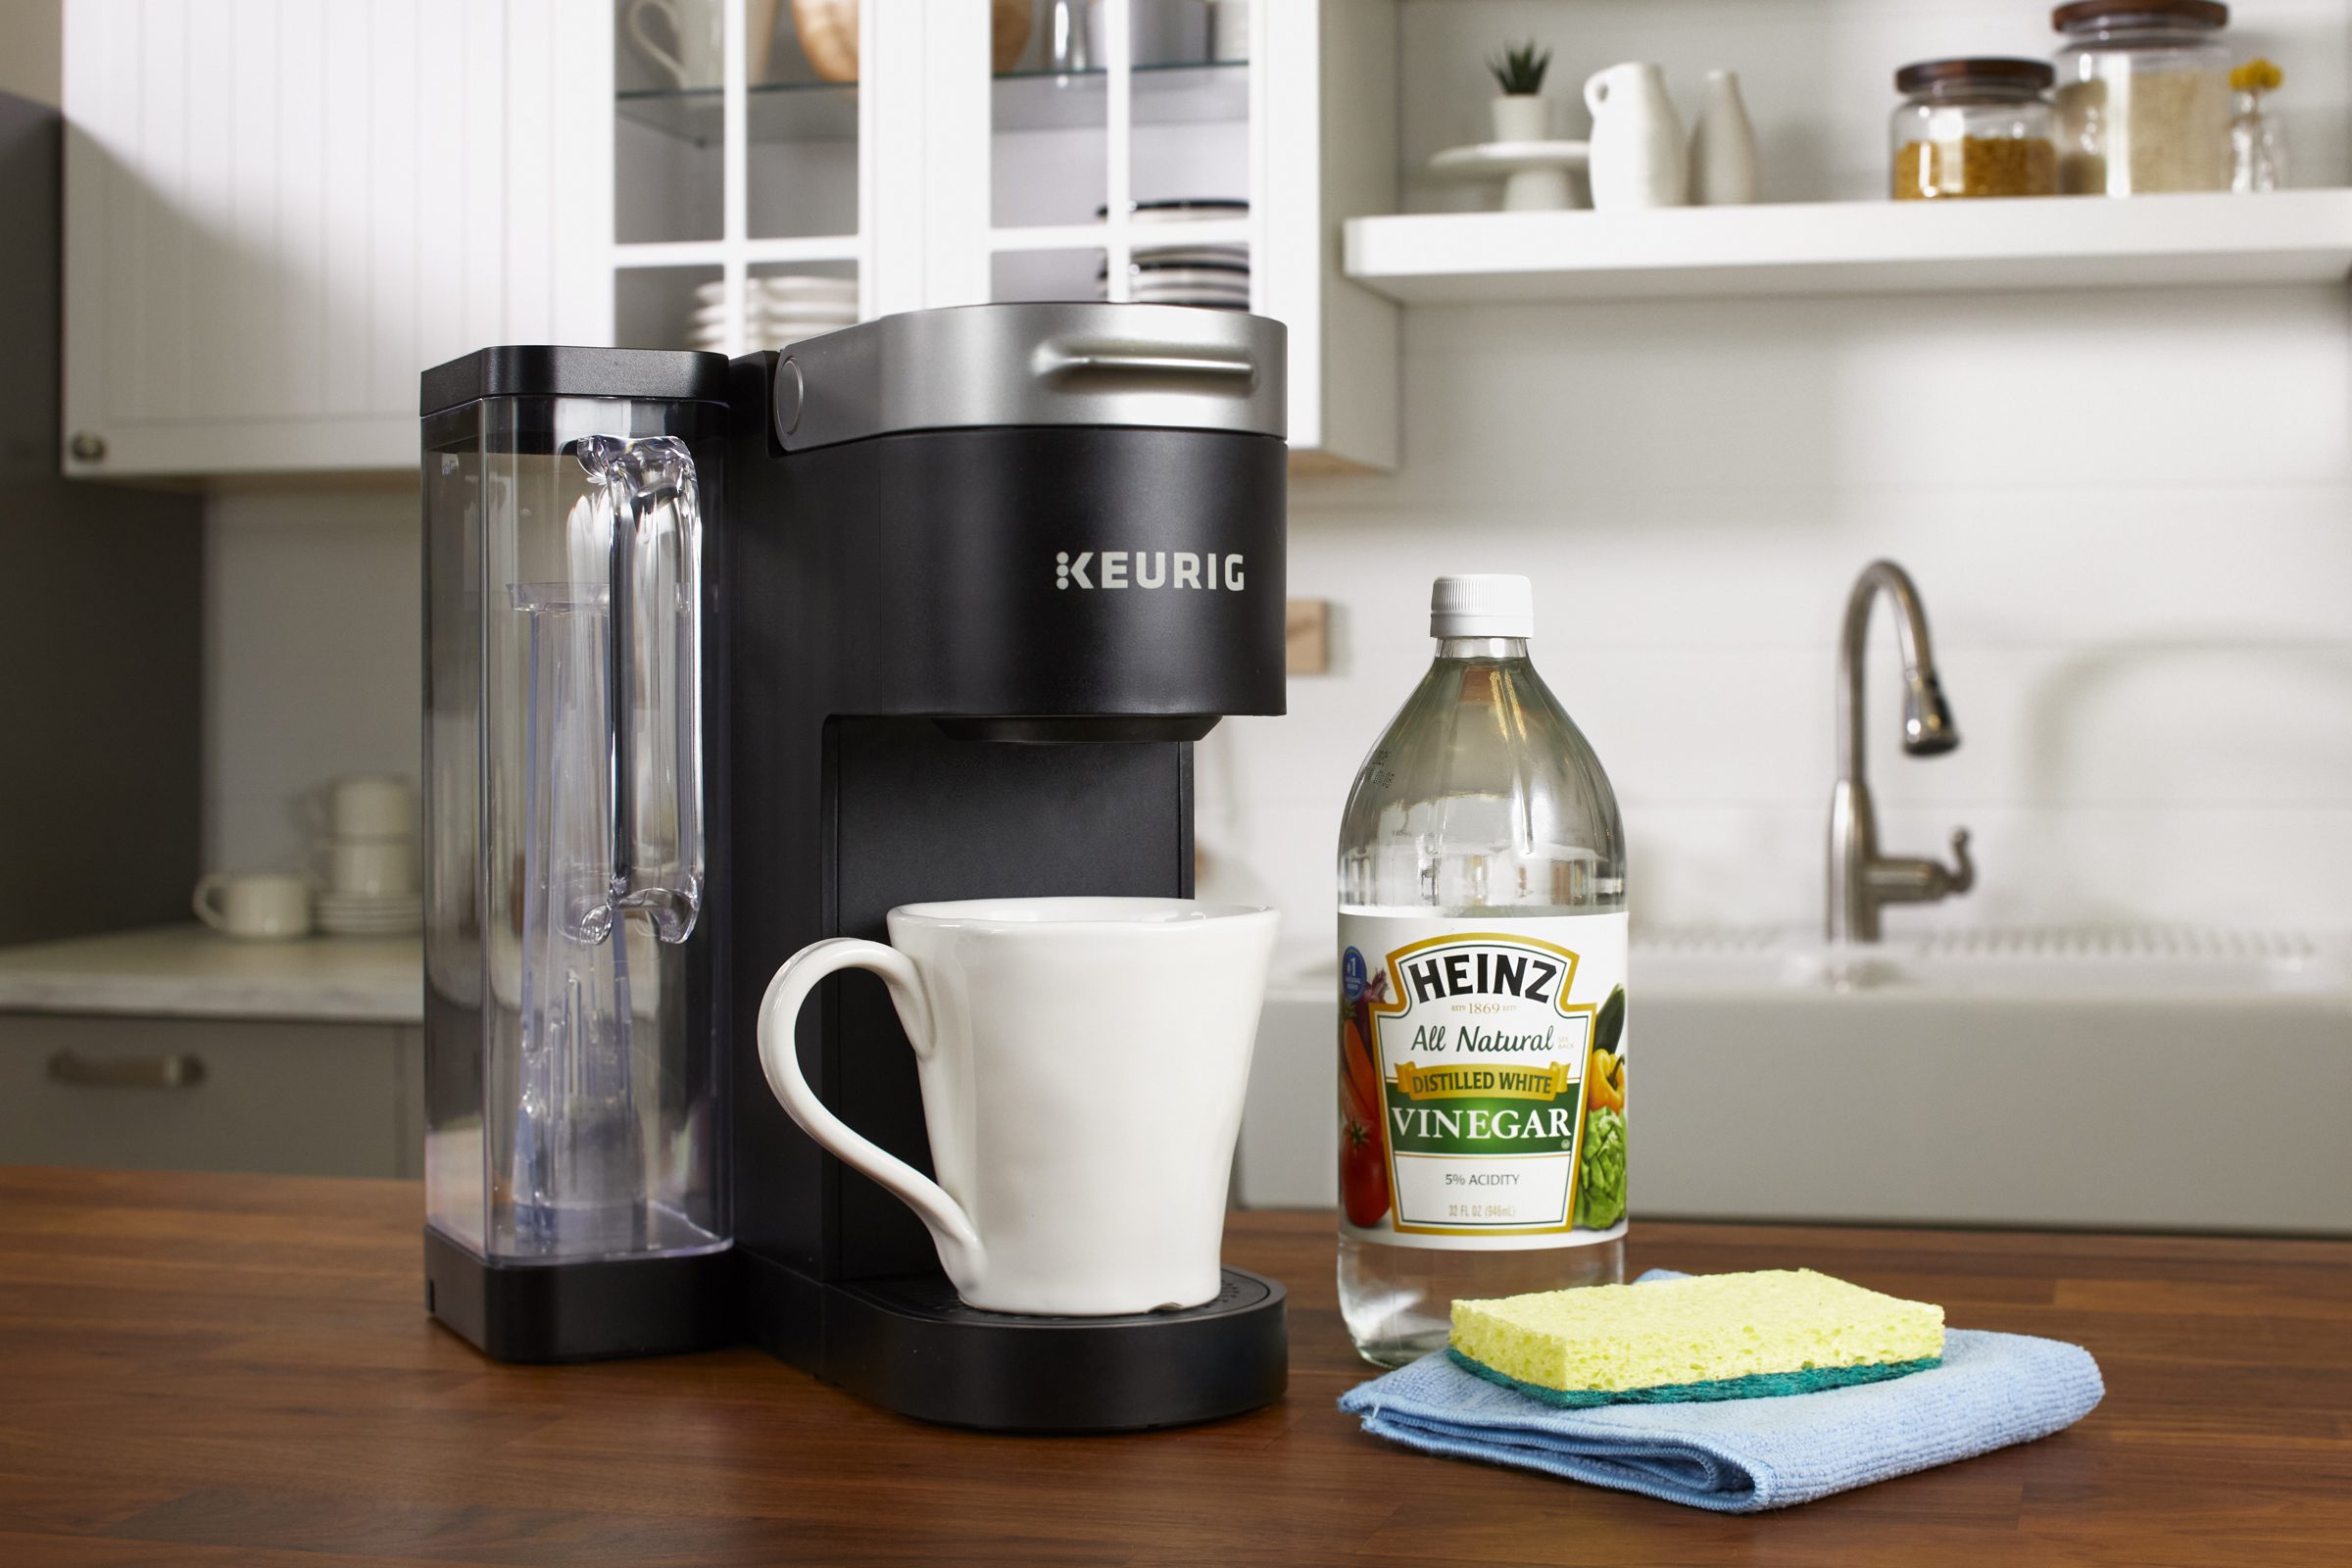 https://www.rd.com/wp-content/uploads/2019/01/keurig-coffee-maker-and-cleaning-supplies-on-kitchen-counter_RDigital_HubCleaning_keurig_003.jpg?fit=700%2C1024